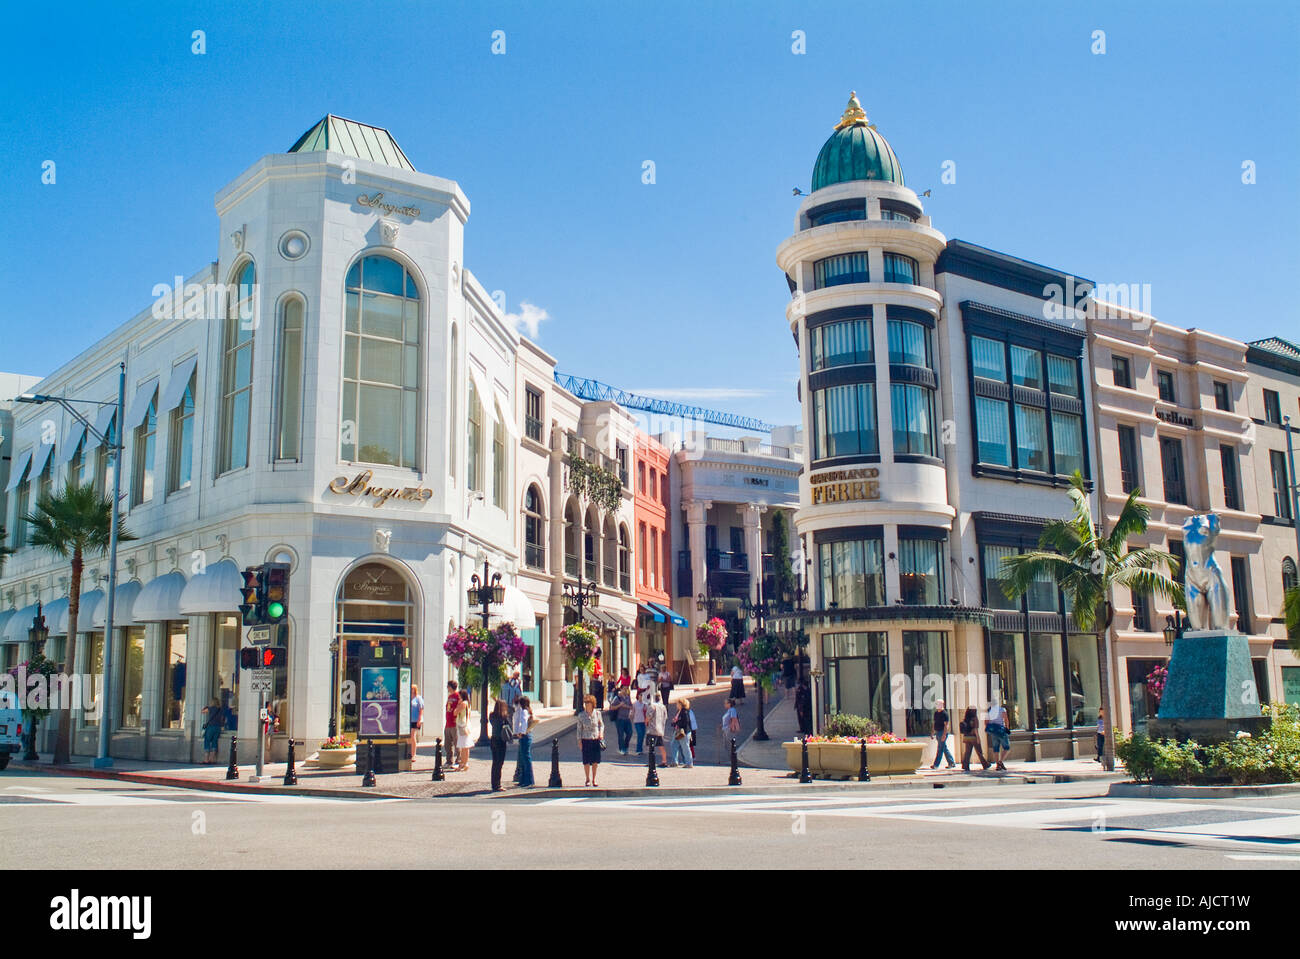 Rodeo Drive shopping area in Beverly Hills Los Angeles California Stock ...